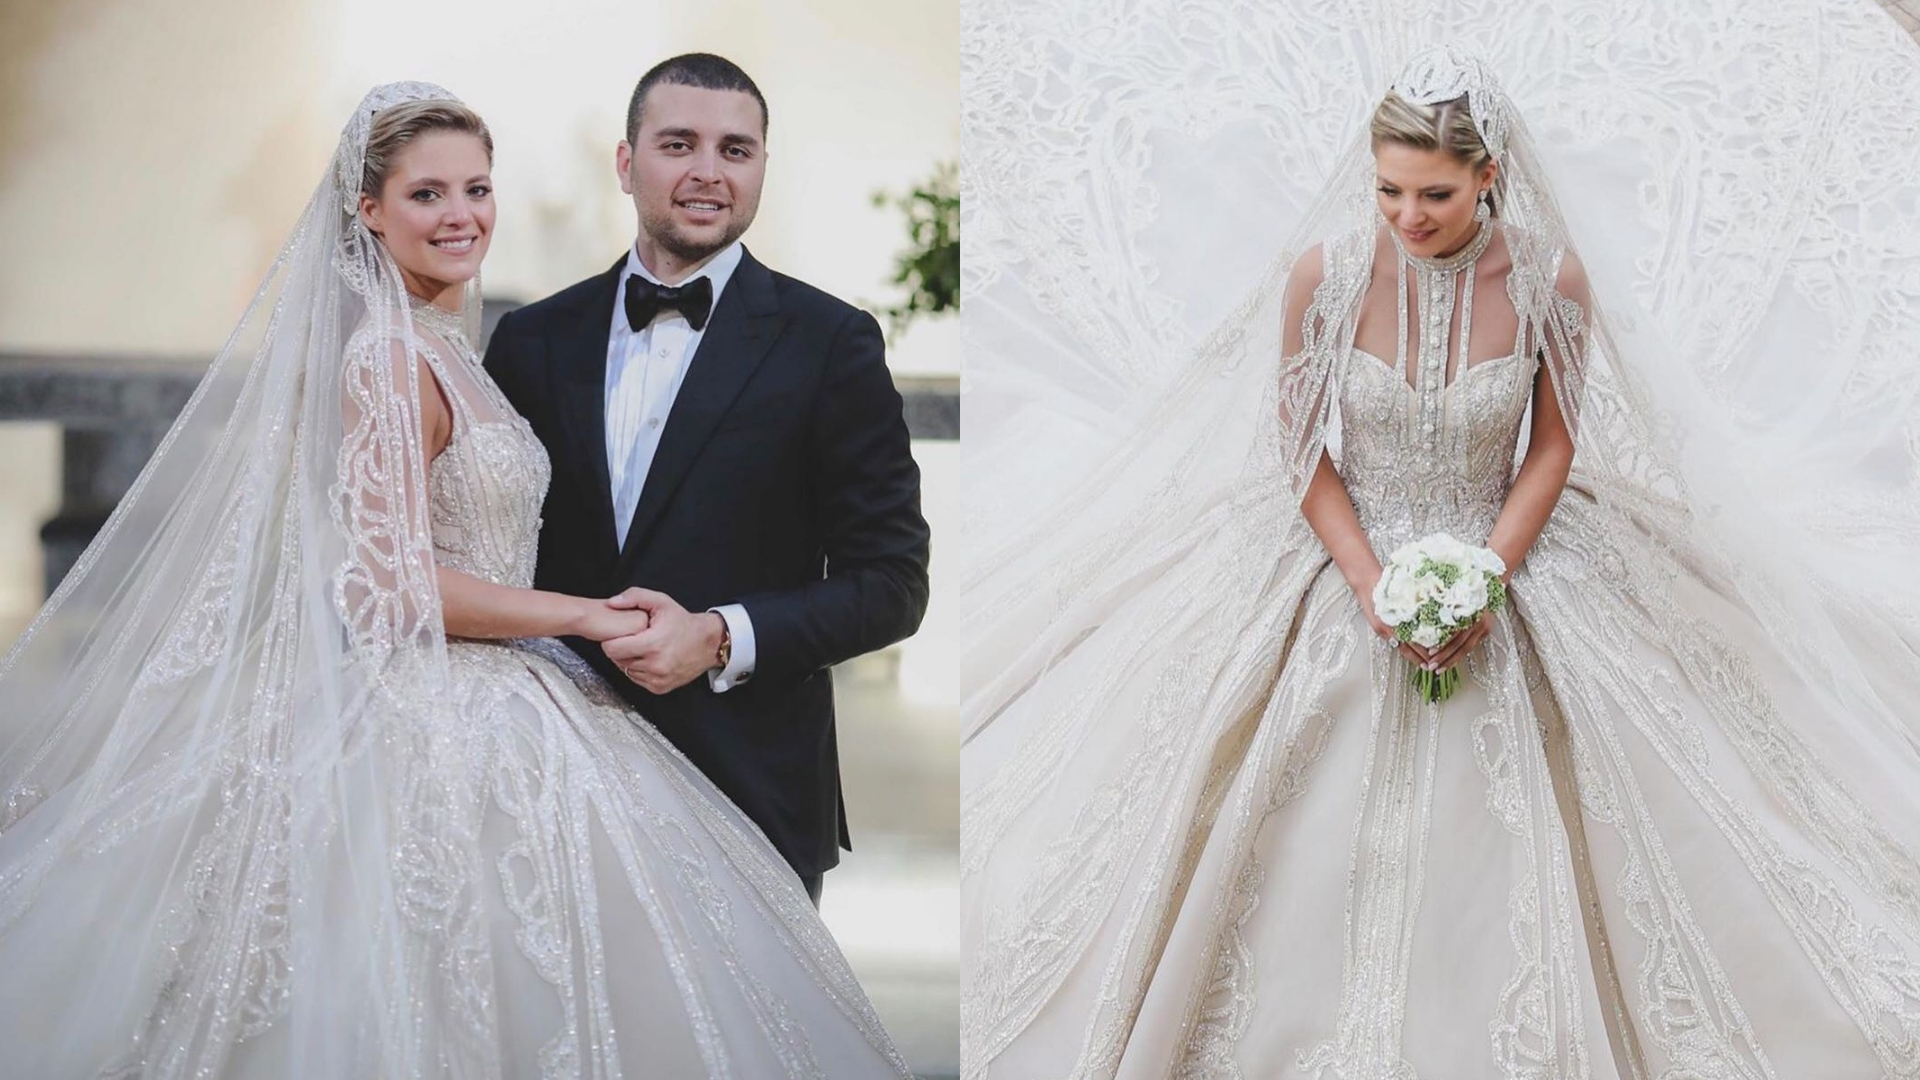 Inside the wedding of Elie Saab Junior and Christina Mourad in